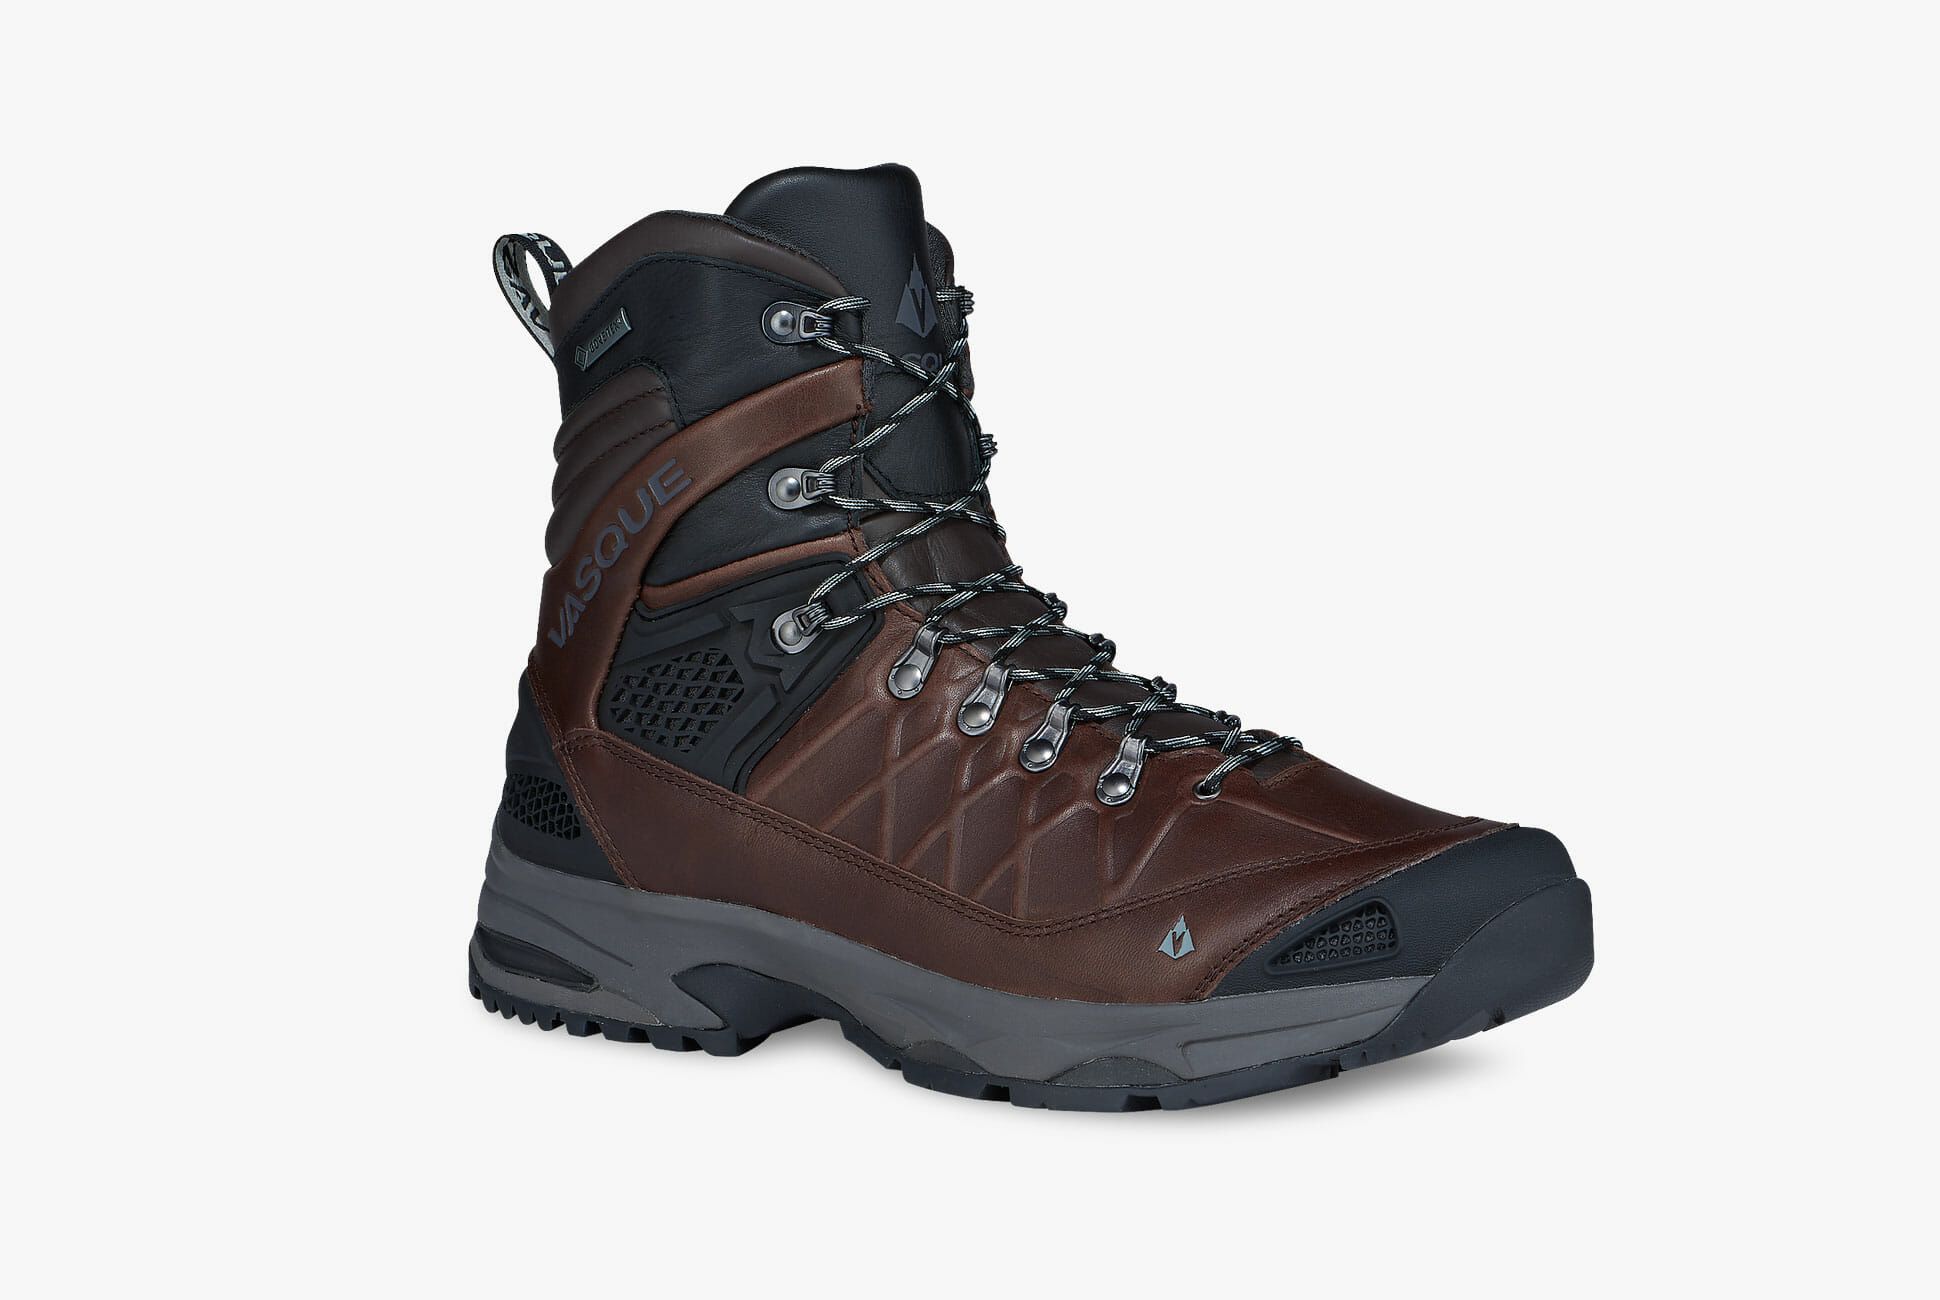 One of the Best Hiking Boots of the 